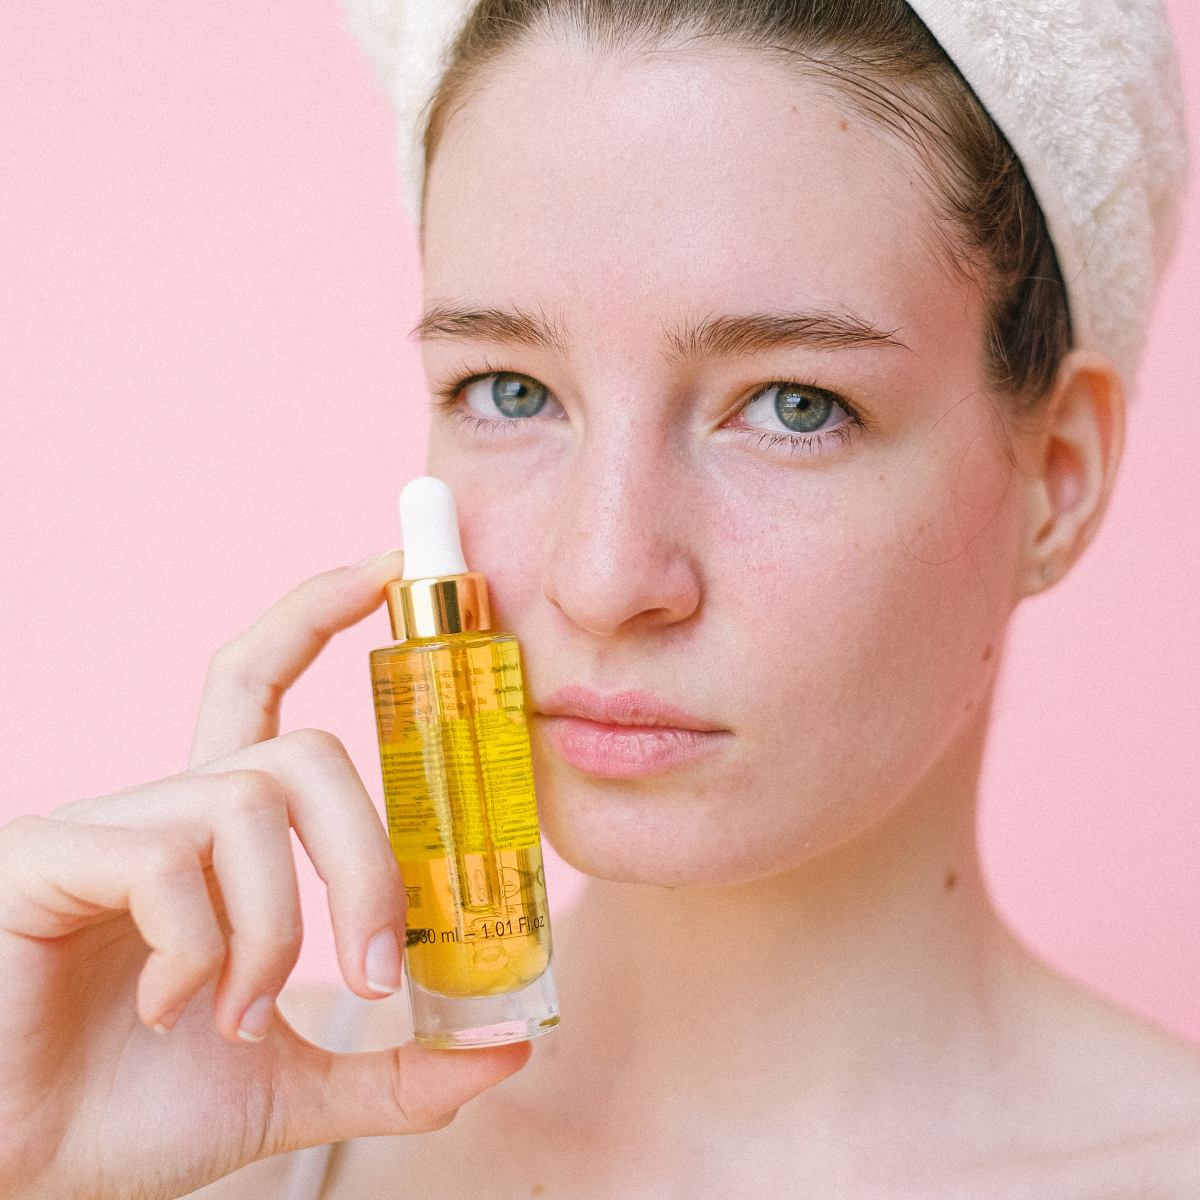 7 Best Facial Cleansing Oils For All Skin Types